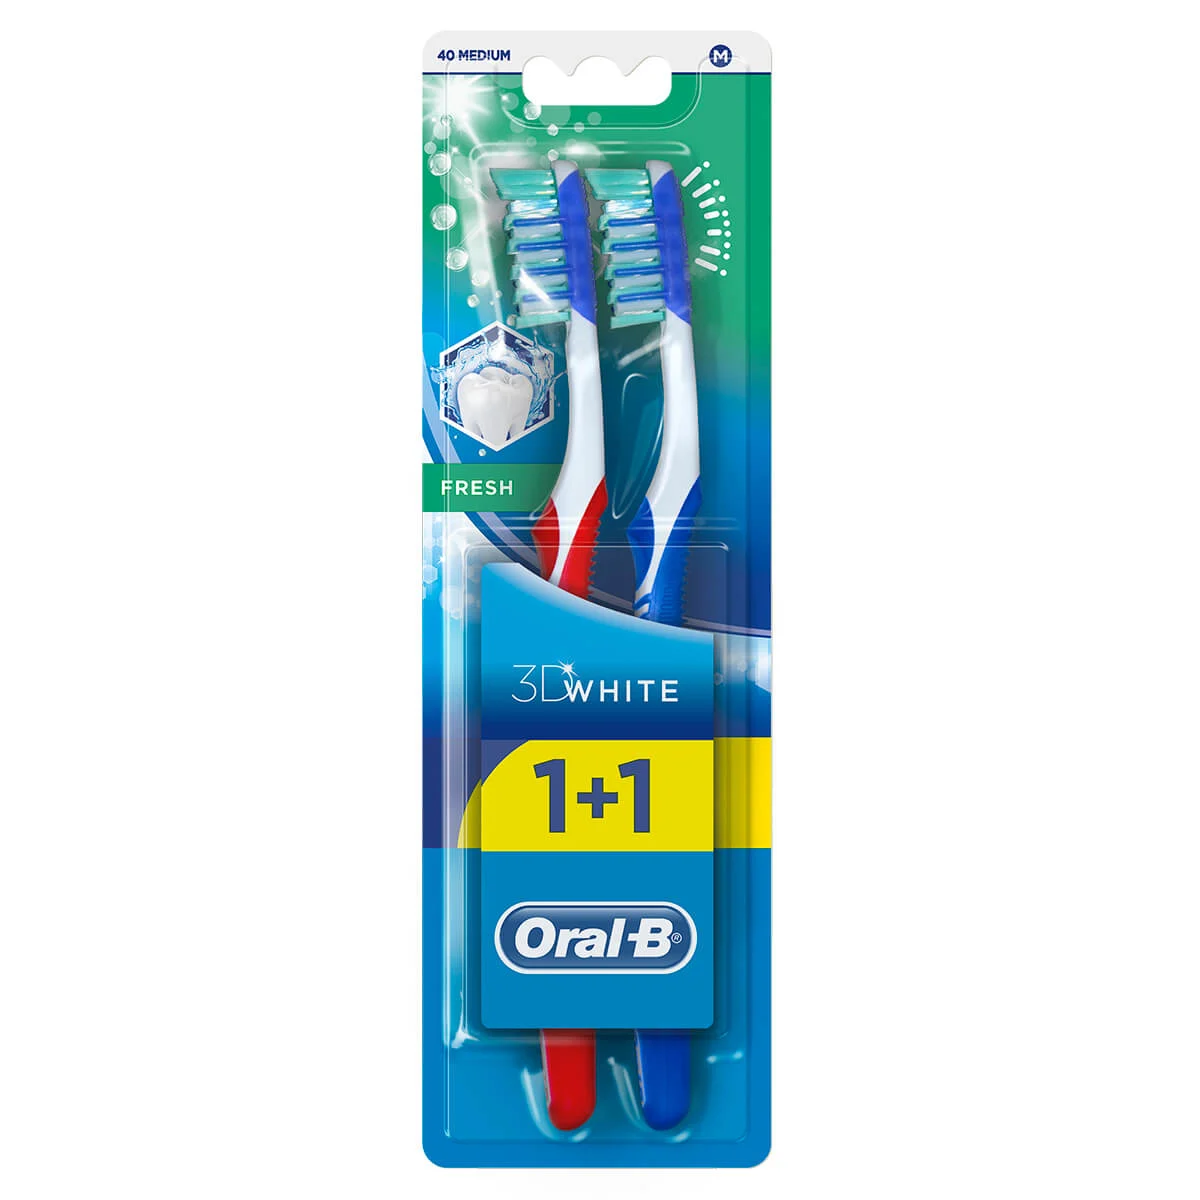 Oral-B 3D White Fresh Manual Toothbrush undefined